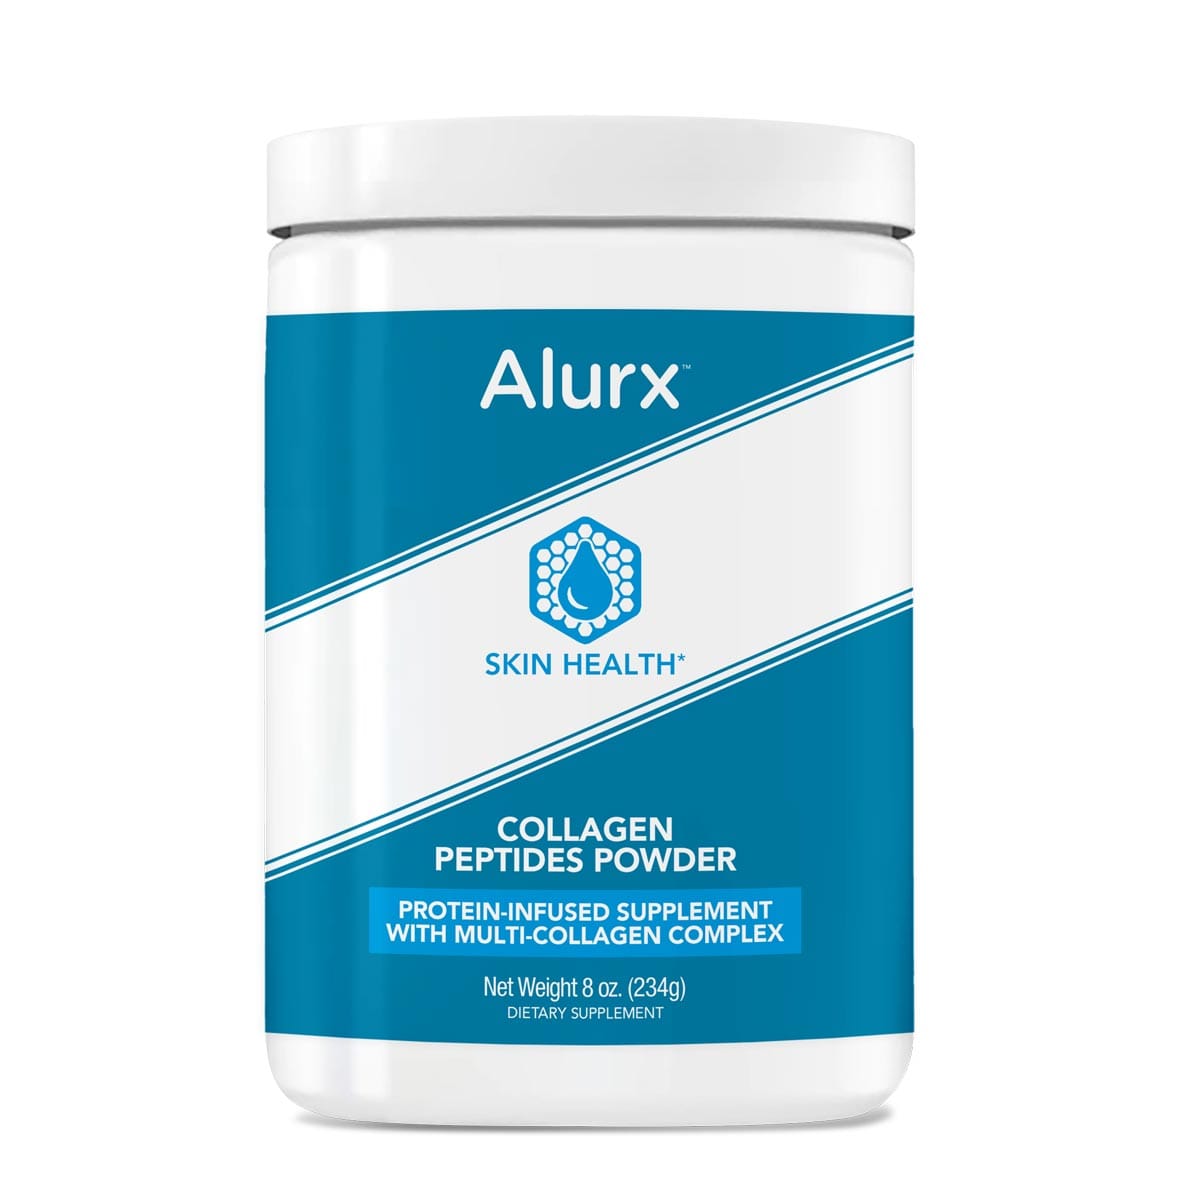 Image displaying the front of the Alurx Collagen Peptides jar.